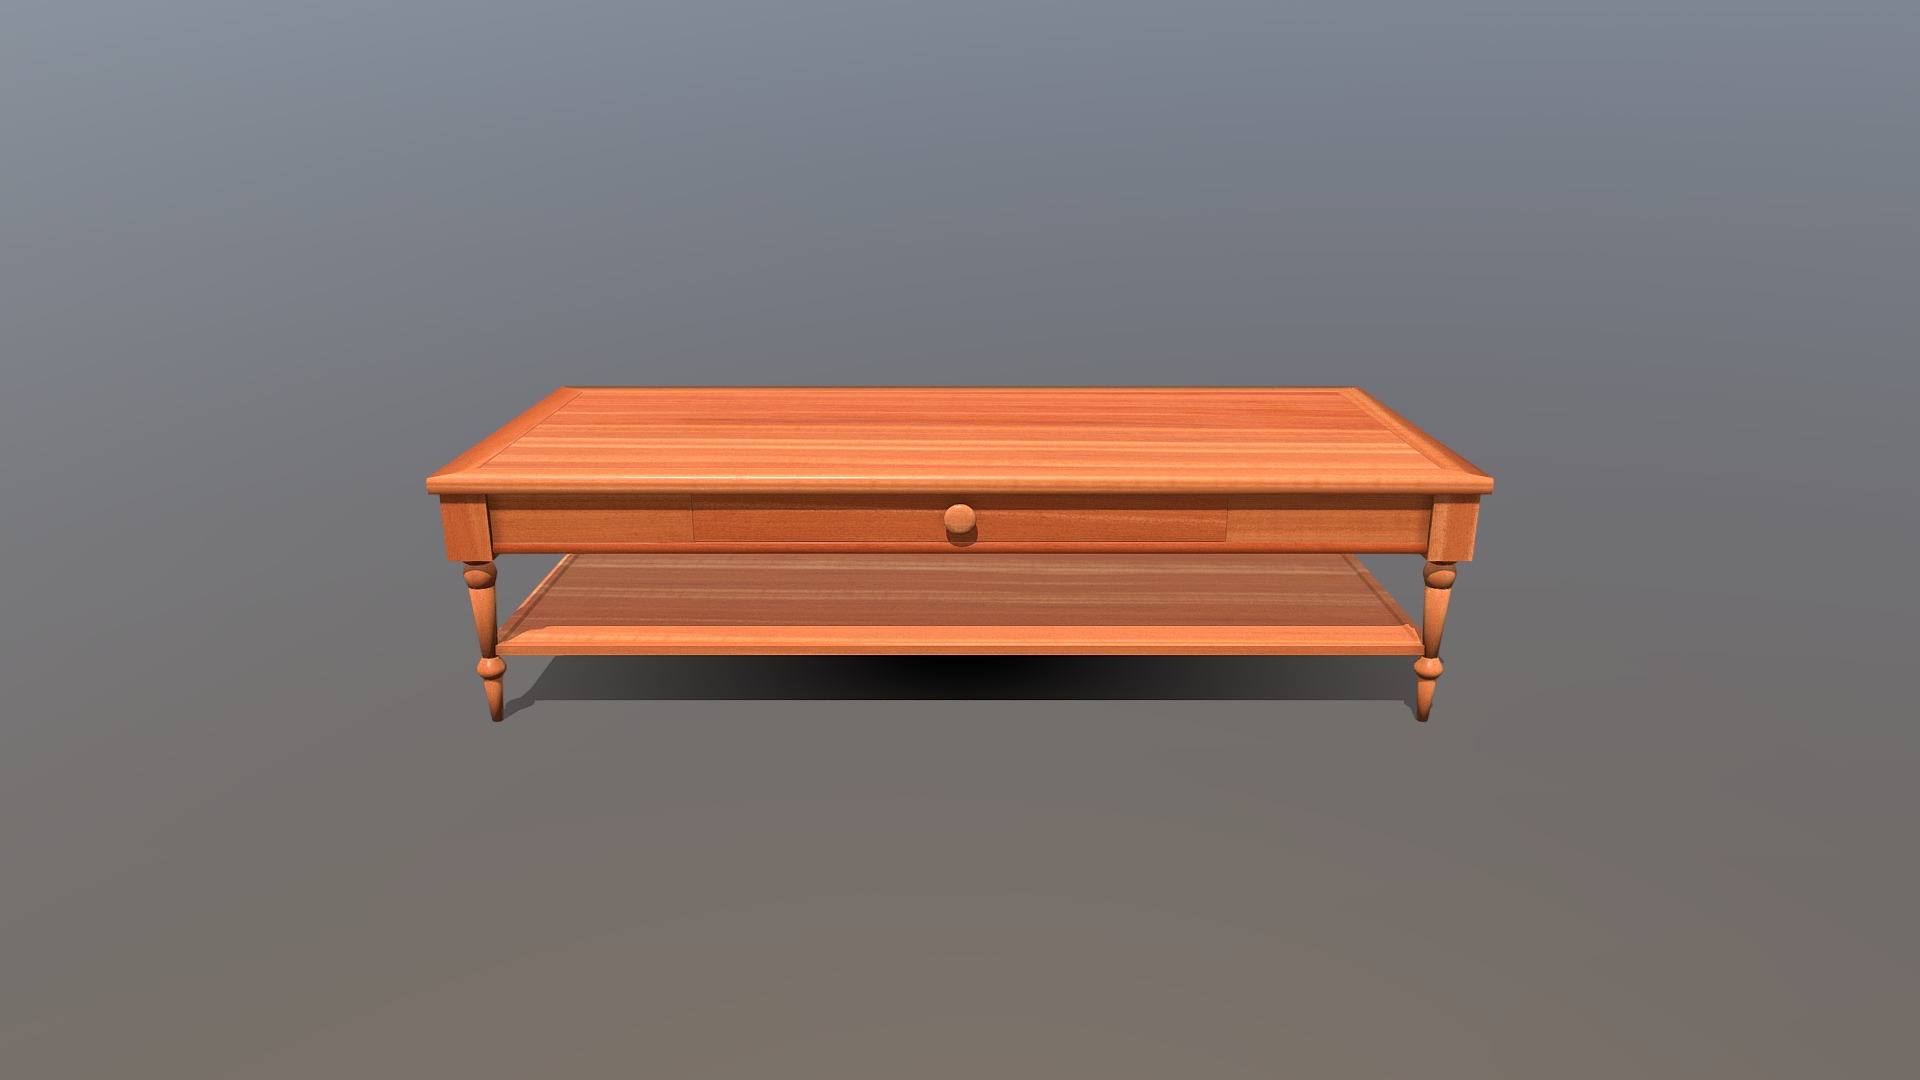 3D model Wood Coffee Table - This is a 3D model of the Wood Coffee Table. The 3D model is about a wooden table with a clear top.